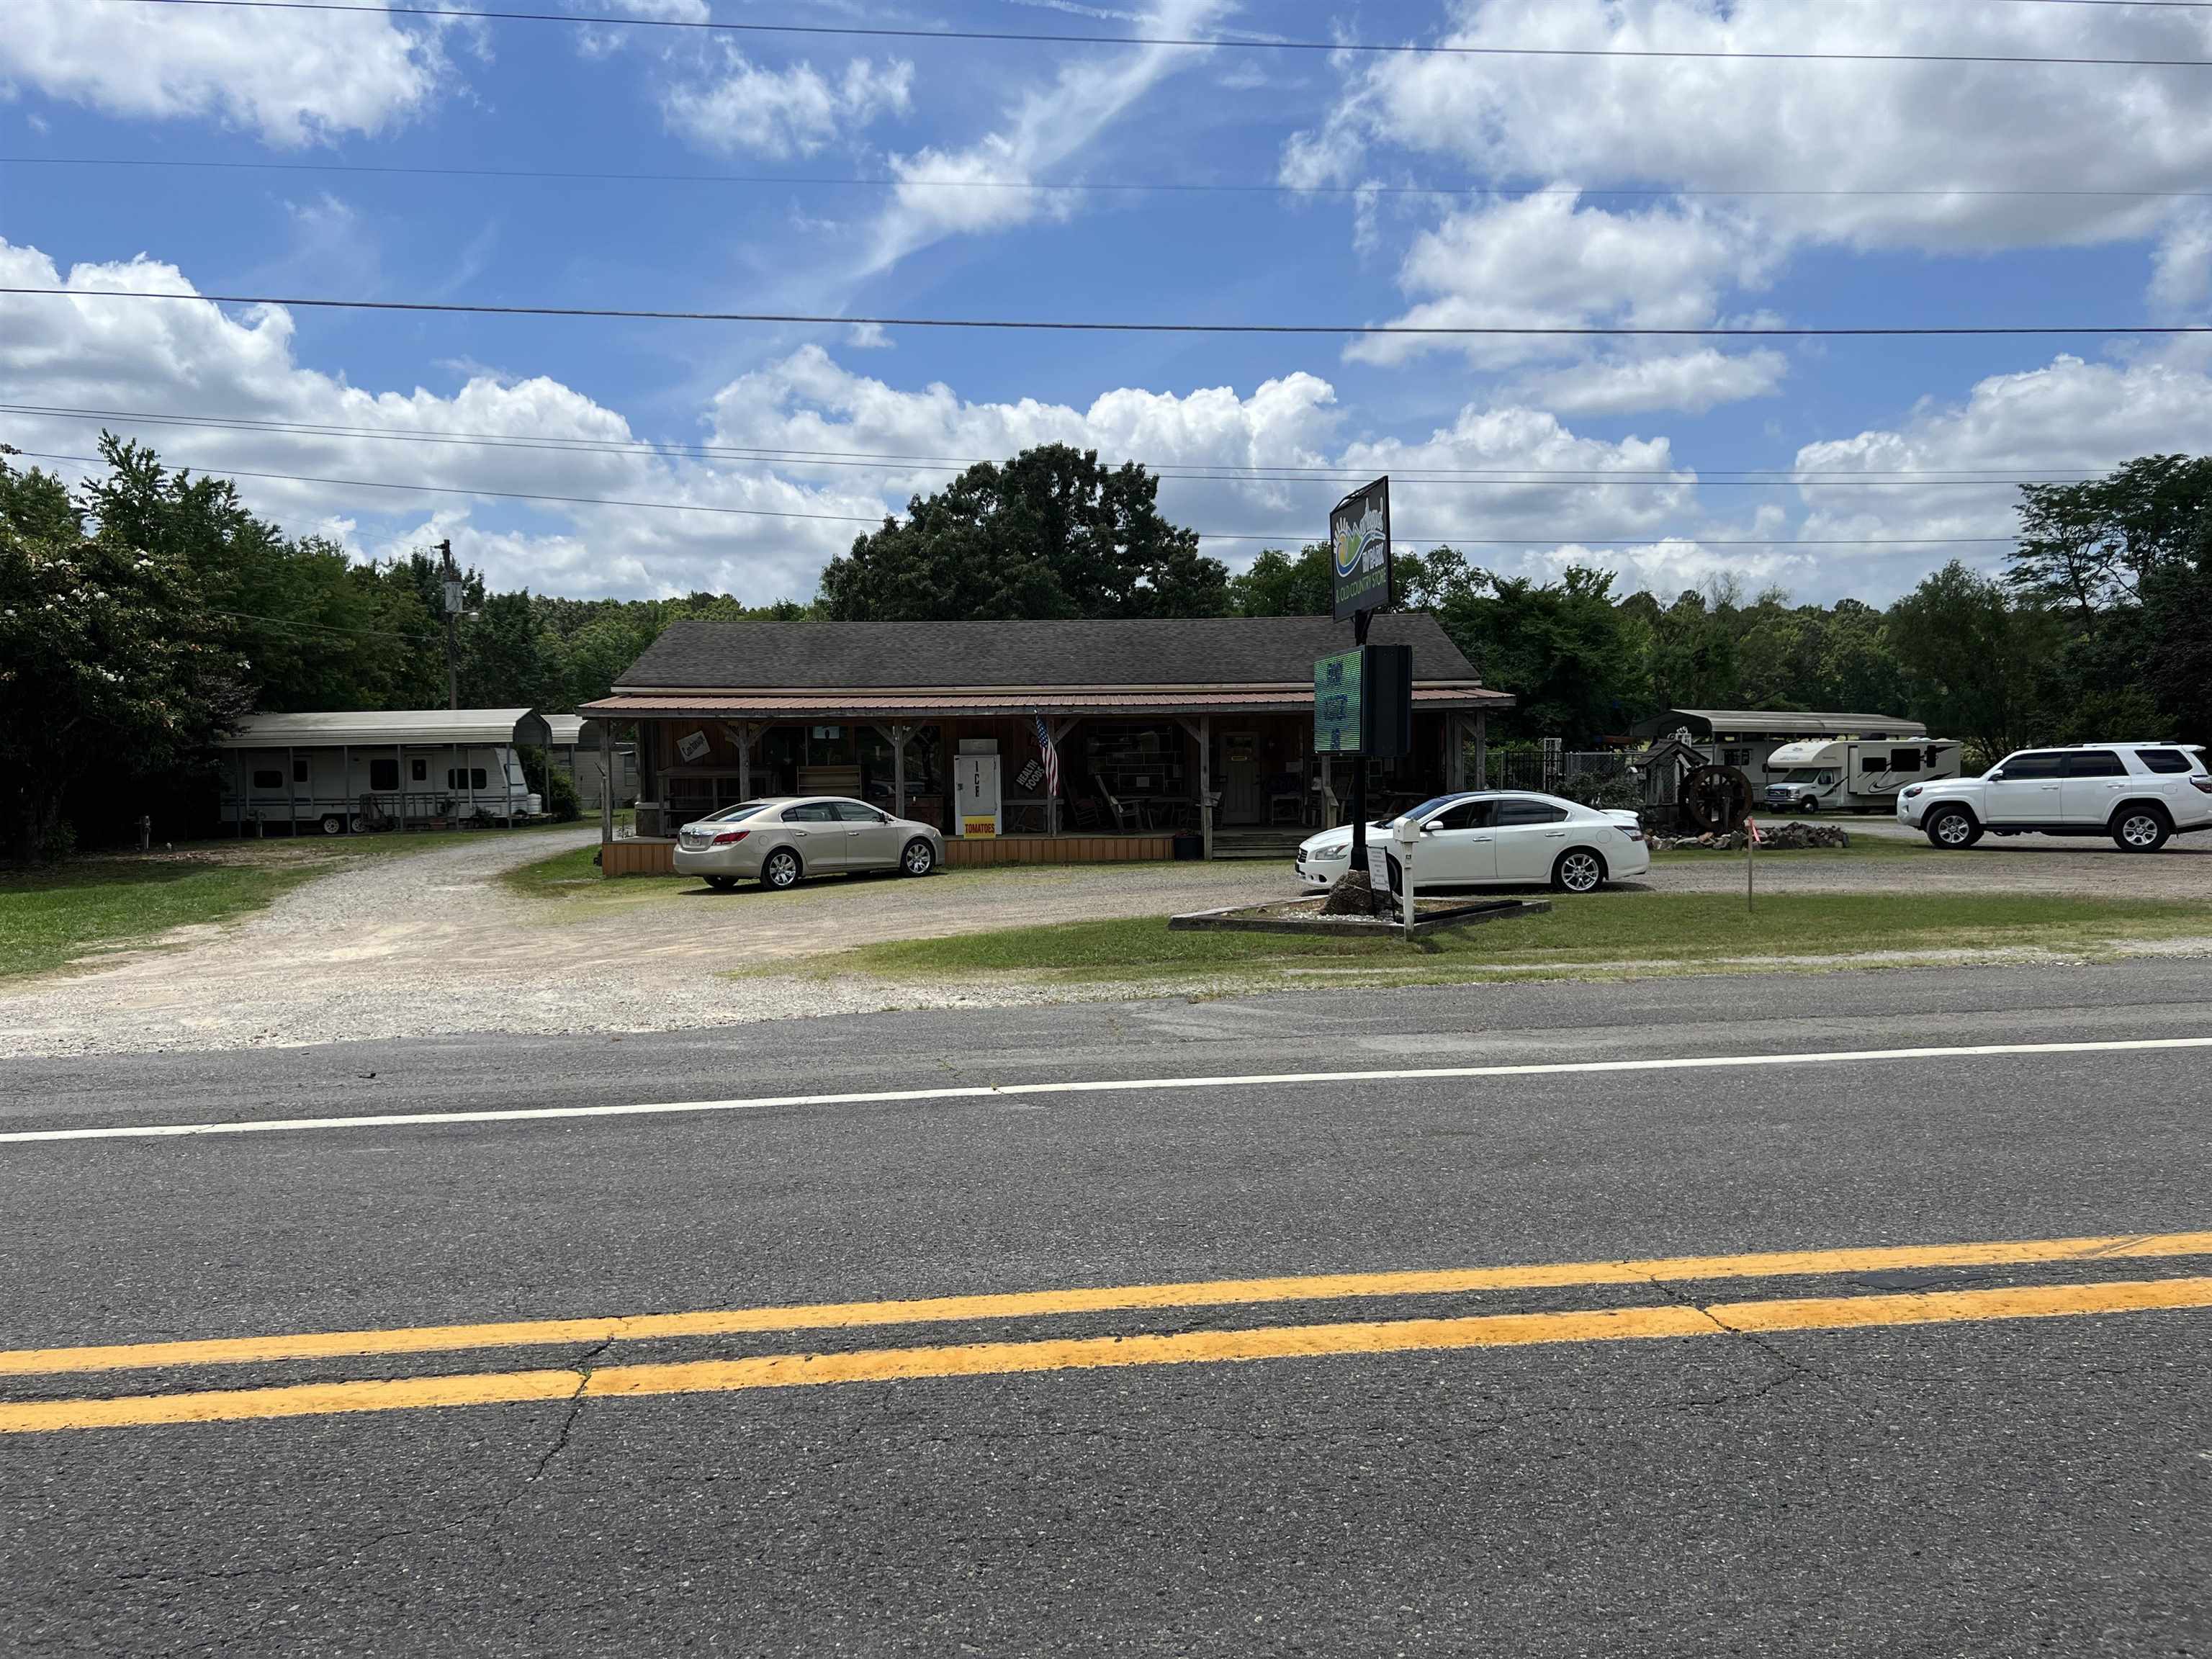 Commercial / Industrial for sale – 3551 E Highway 270   Mount Ida, AR